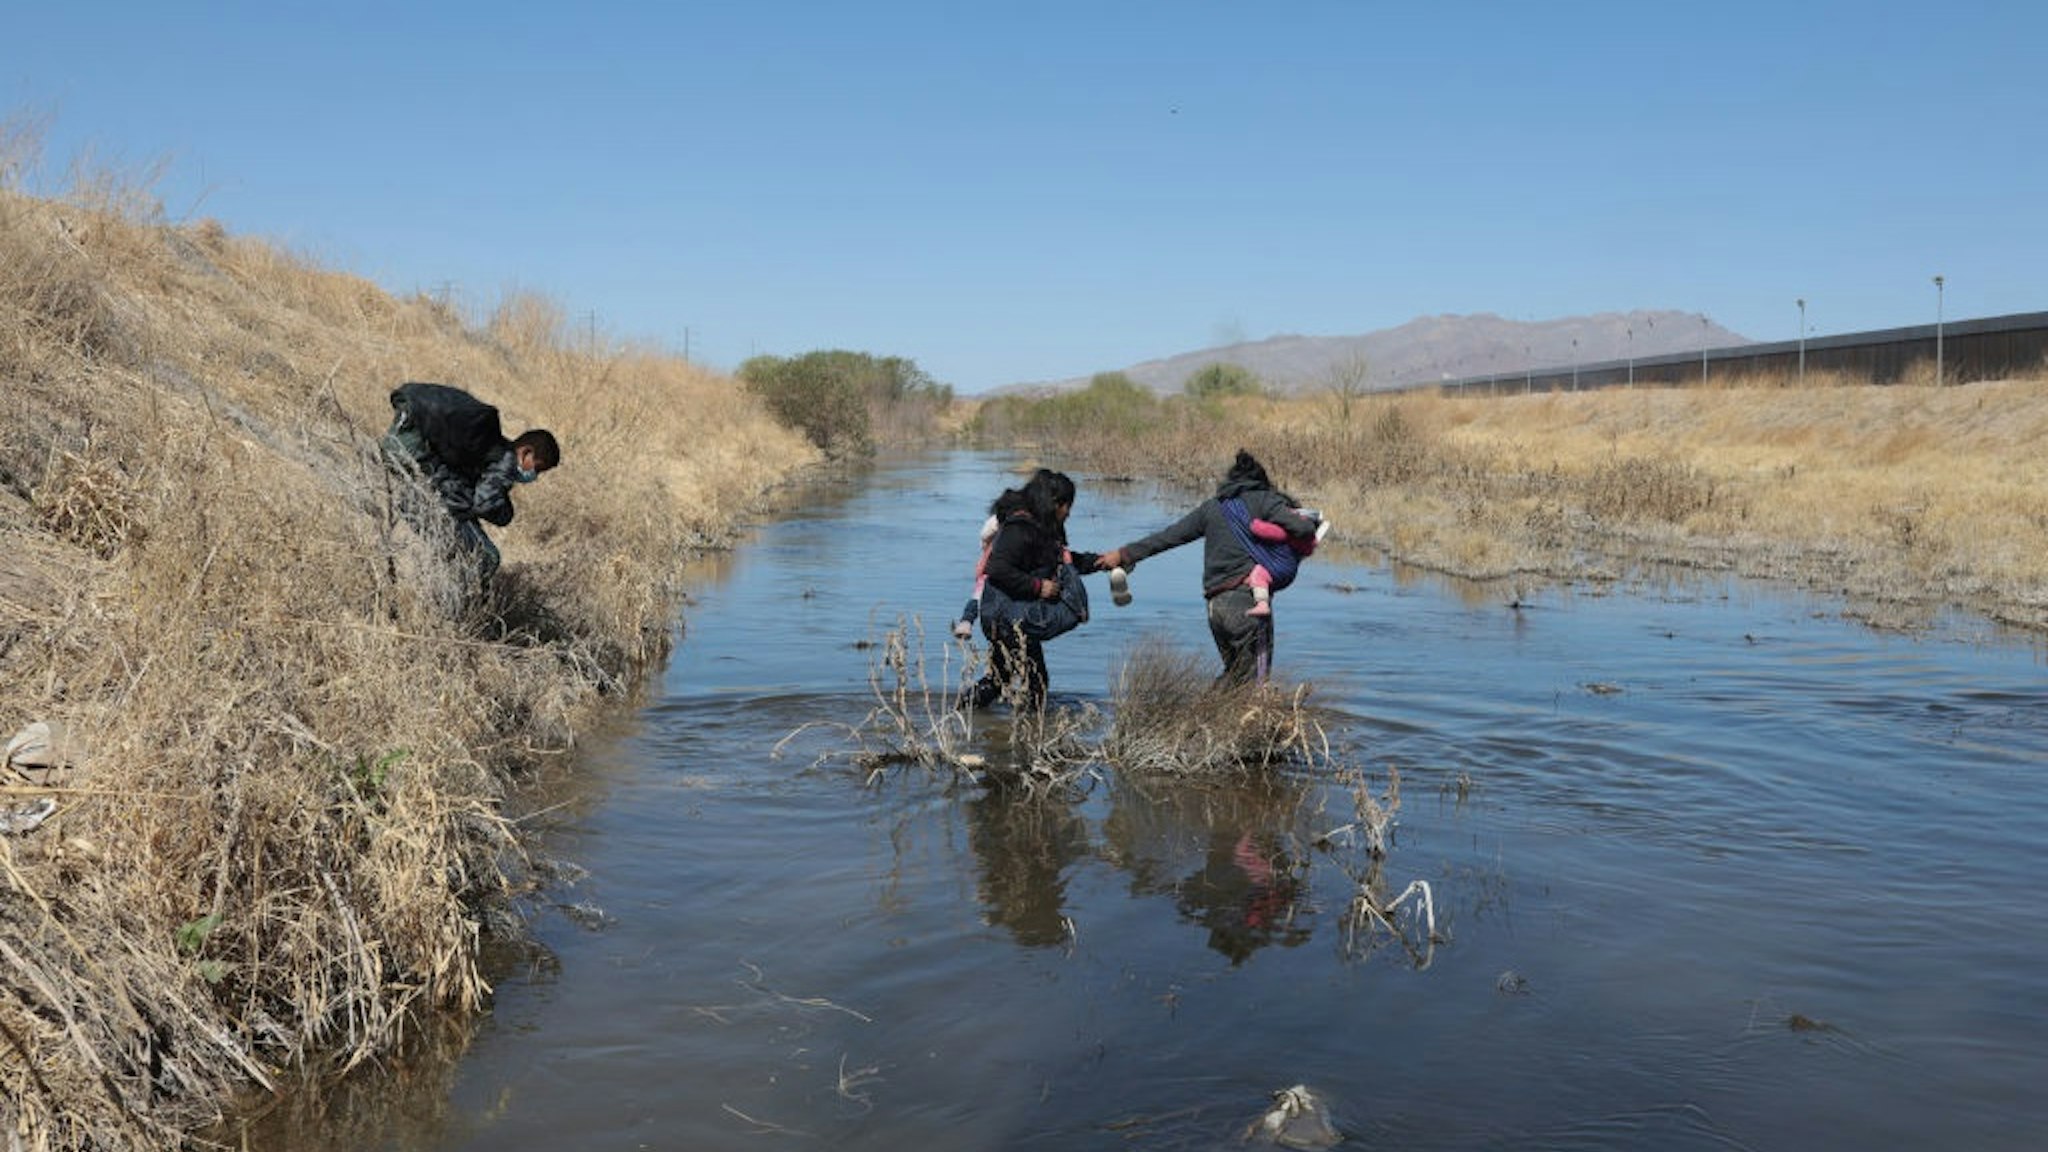 UAREZ, CHIHUAHUA, MEXICO - 2021/03/26: A family of Central American migrants crosses the Rio Grande through Ciudad Juarez, the family crossed the river to surrender to the border patrol with the intention of requesting political asylum in the United States.